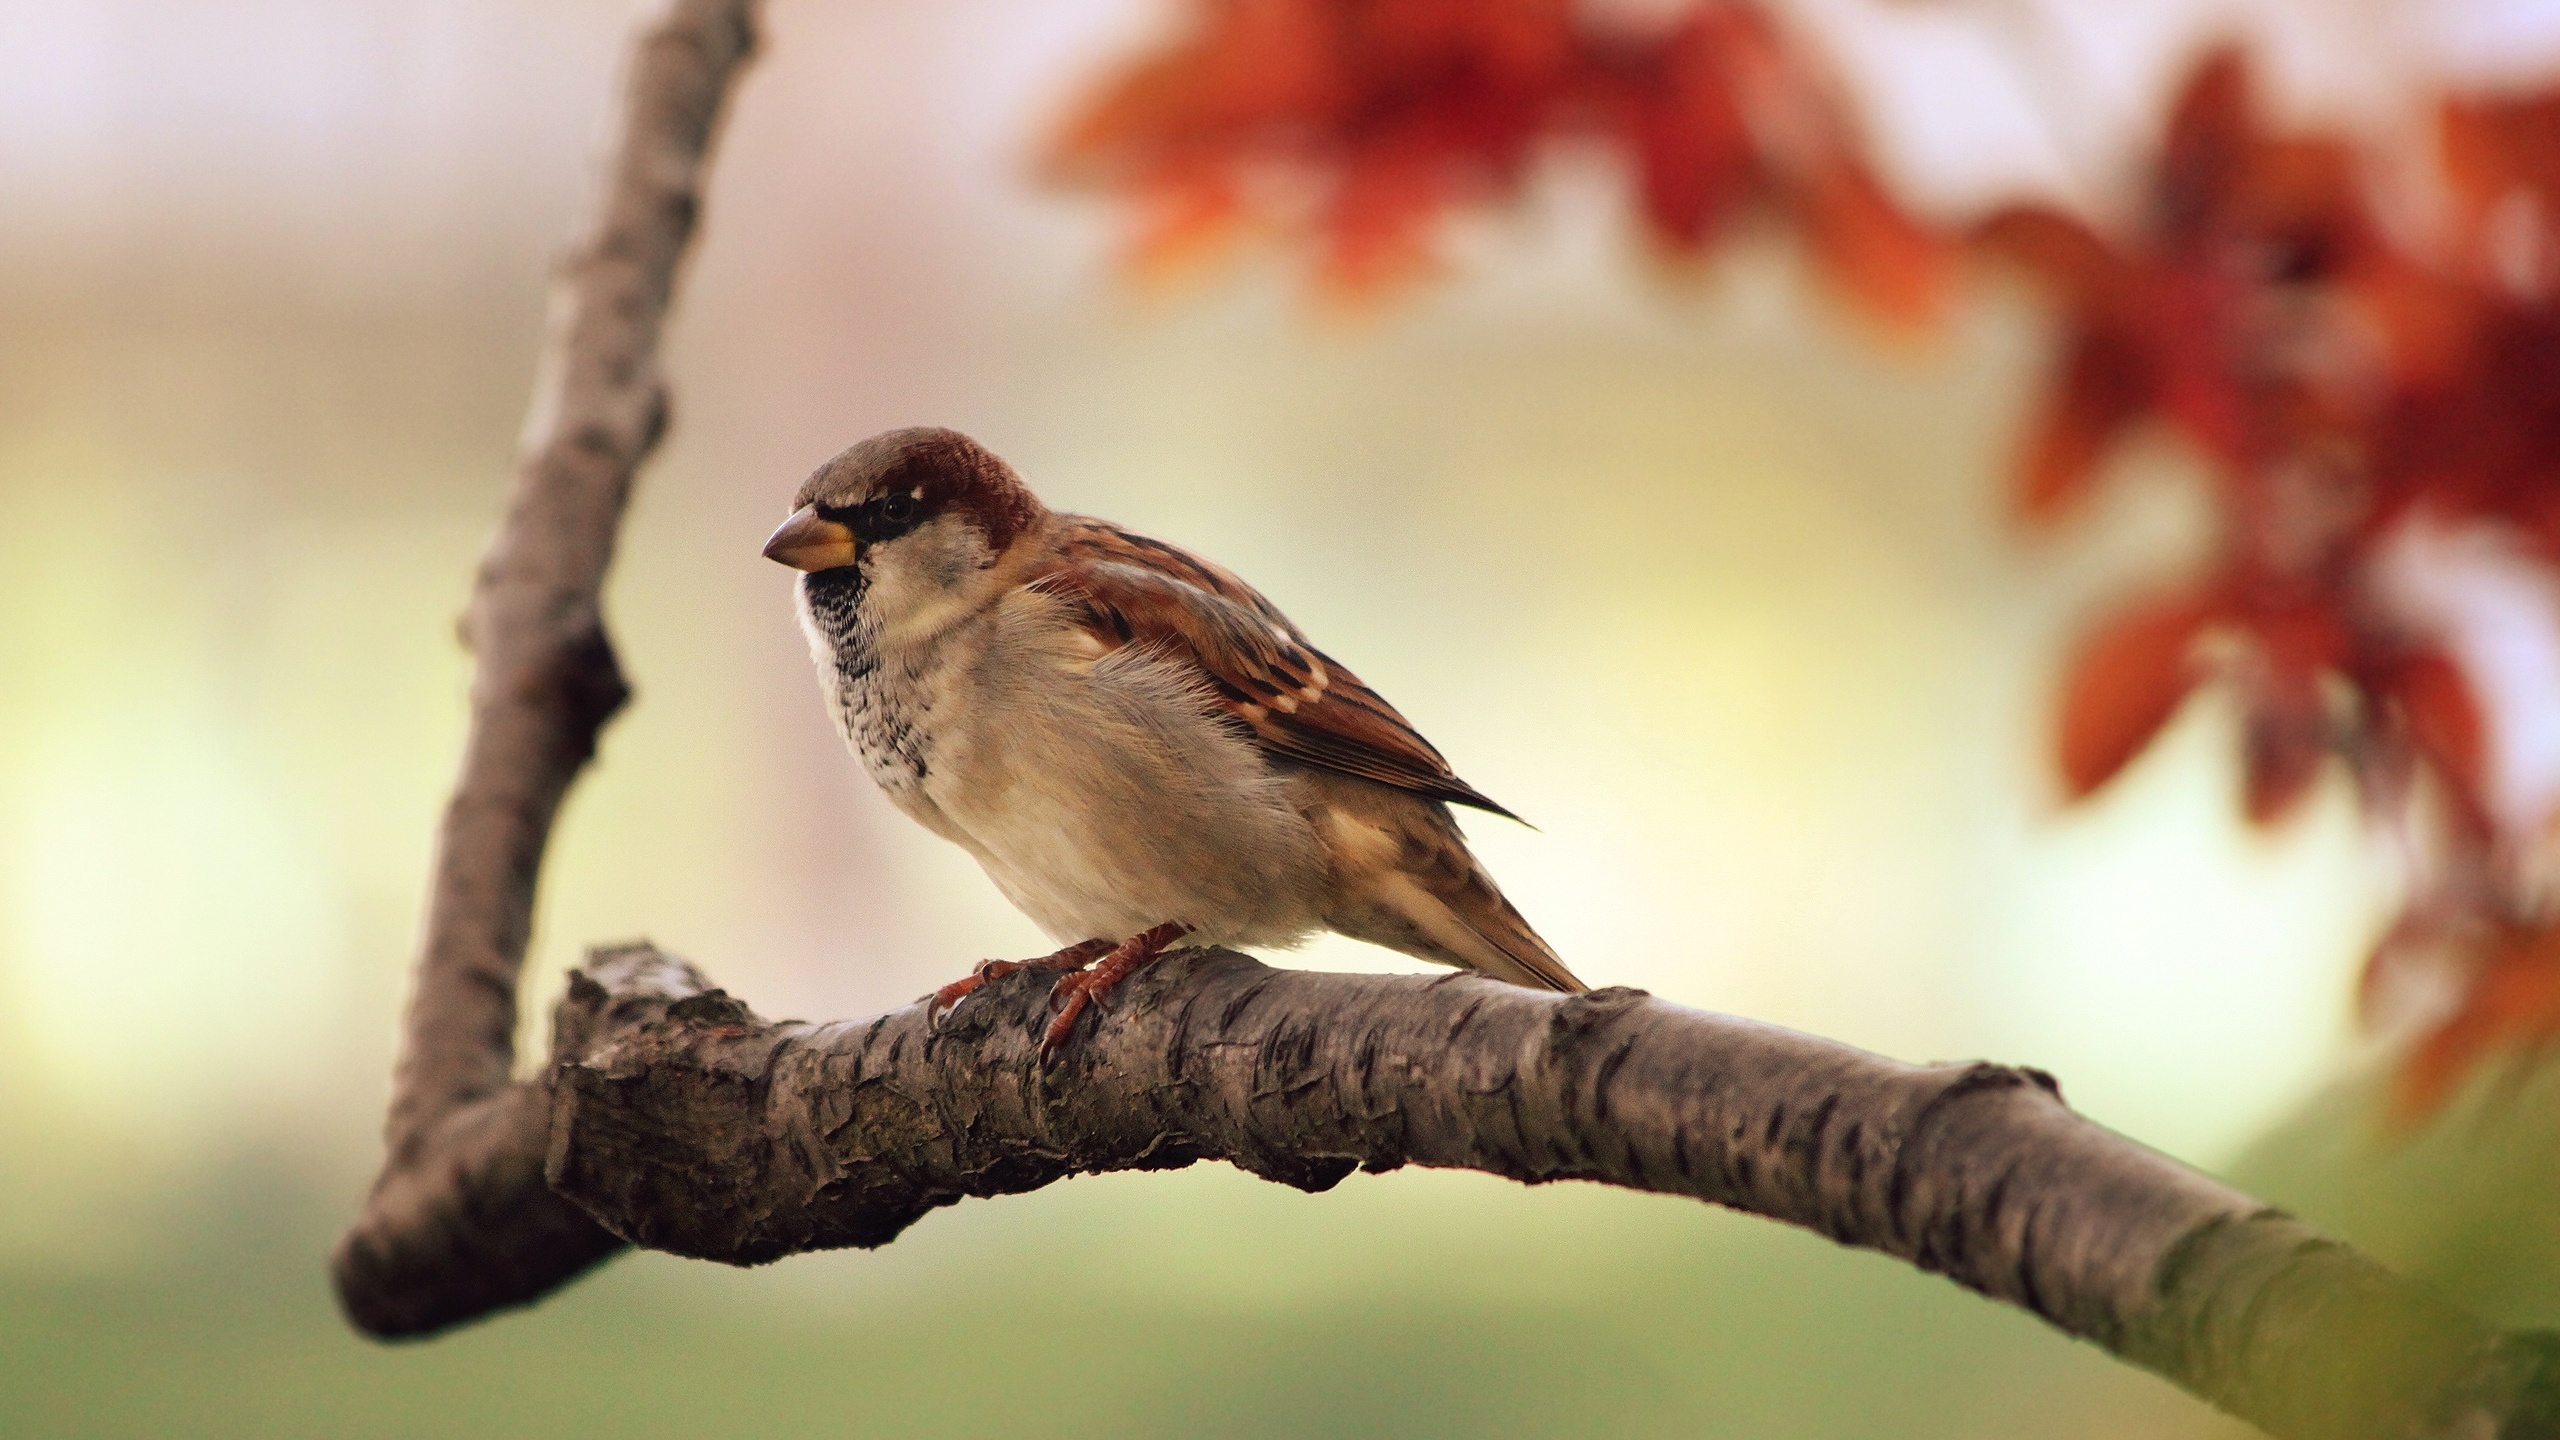 Sparrow Resting for 2560x1440 HDTV resolution